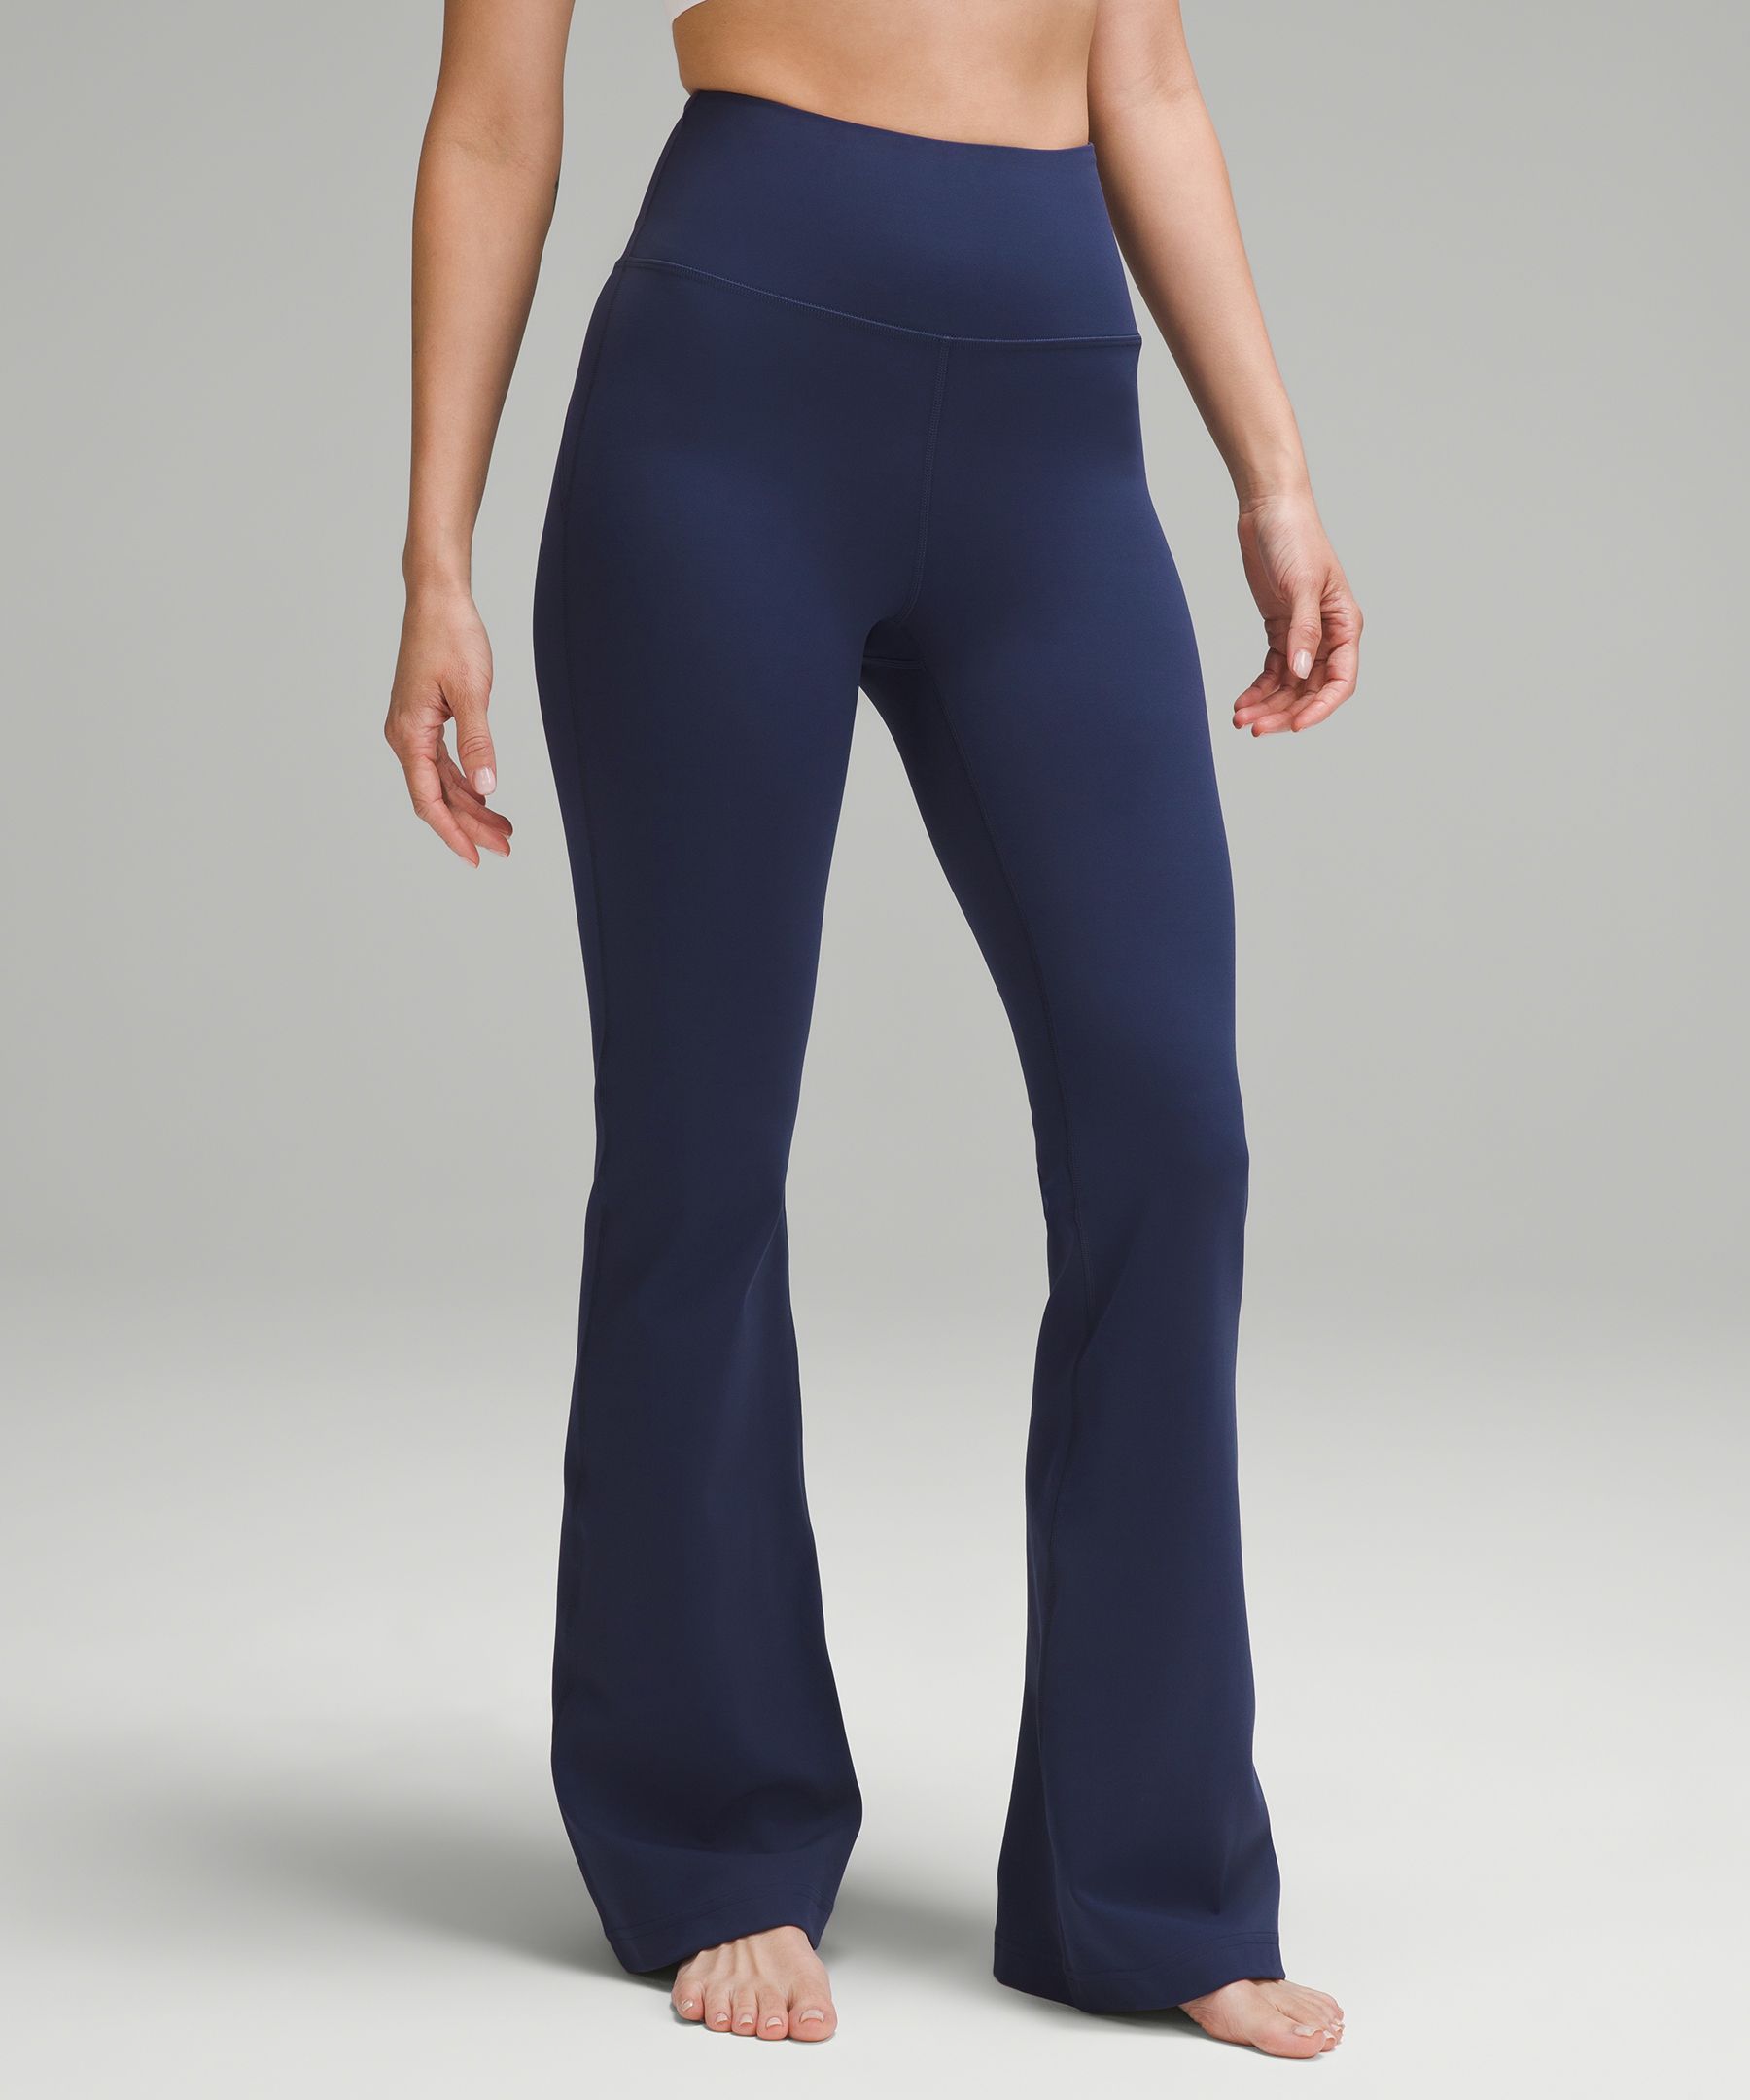 Lululemon Groove Flared Pants Review